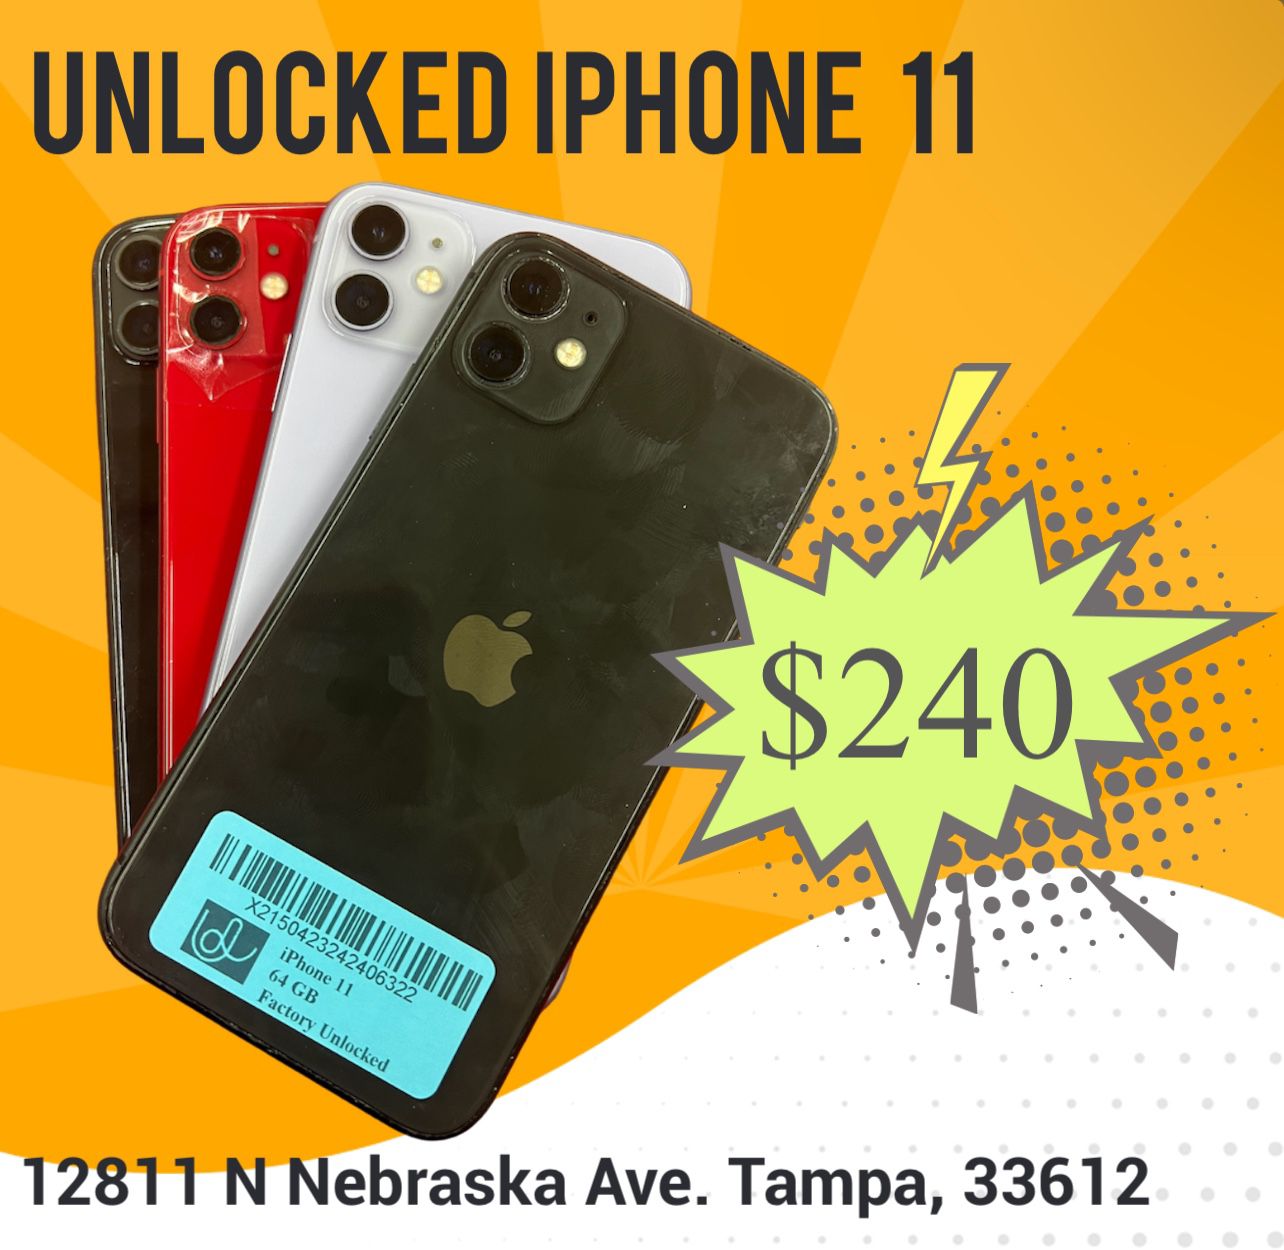 11 Unlocked clean like new, many colors available with Charger & Warranty @ 12811 N Nebraska Ave. Tampa, 33612